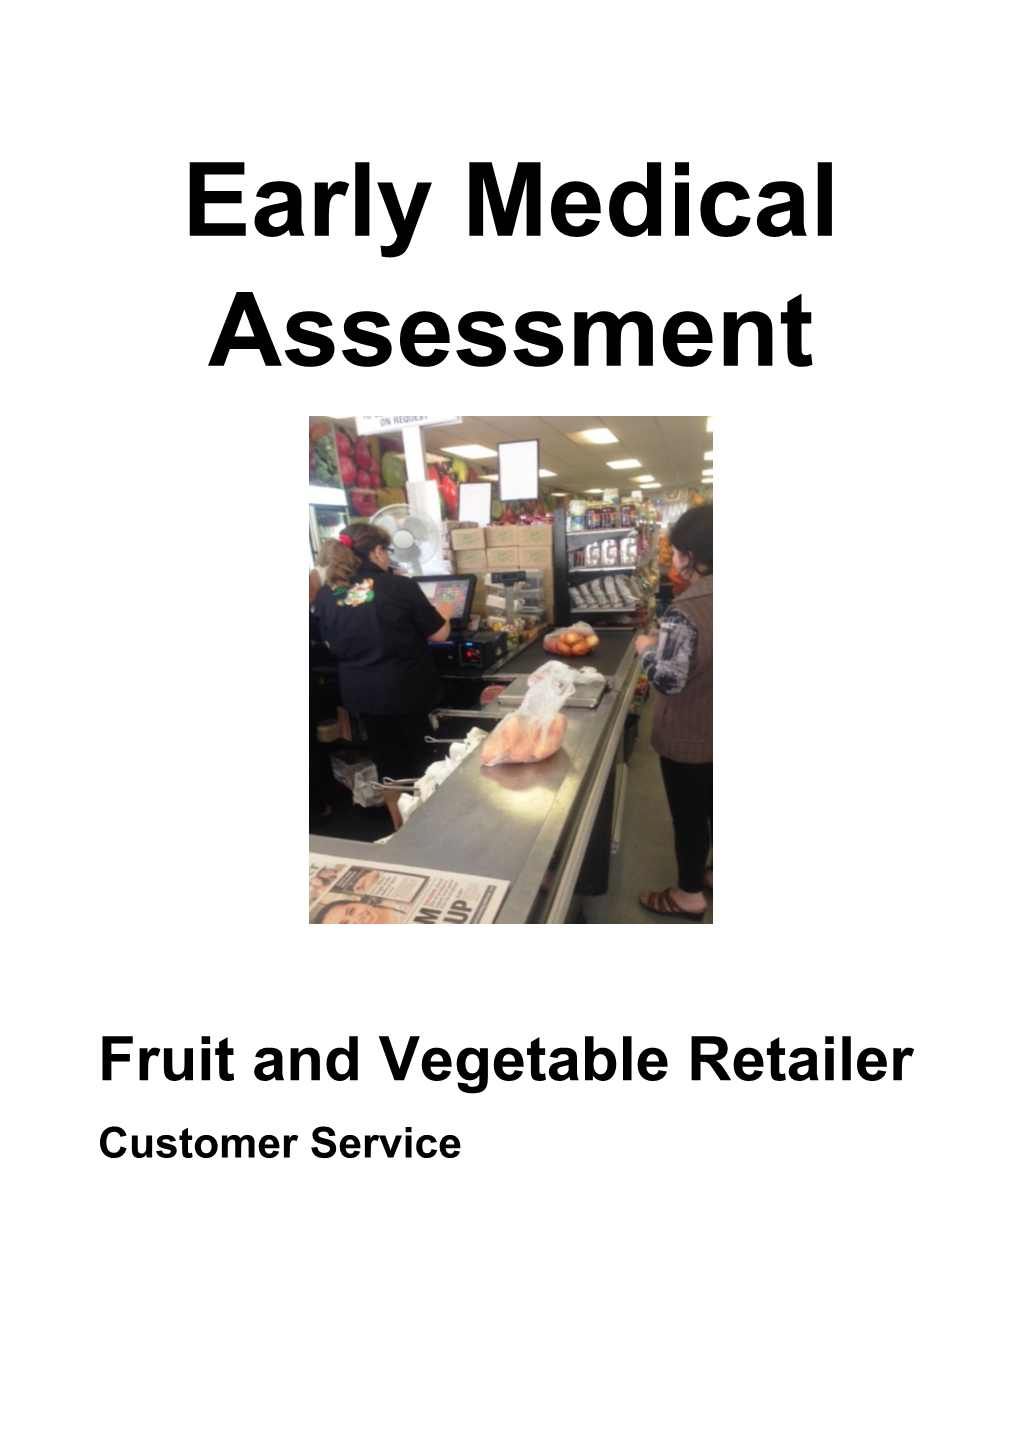 Fruit and Vegetable Retailing - Customer Service